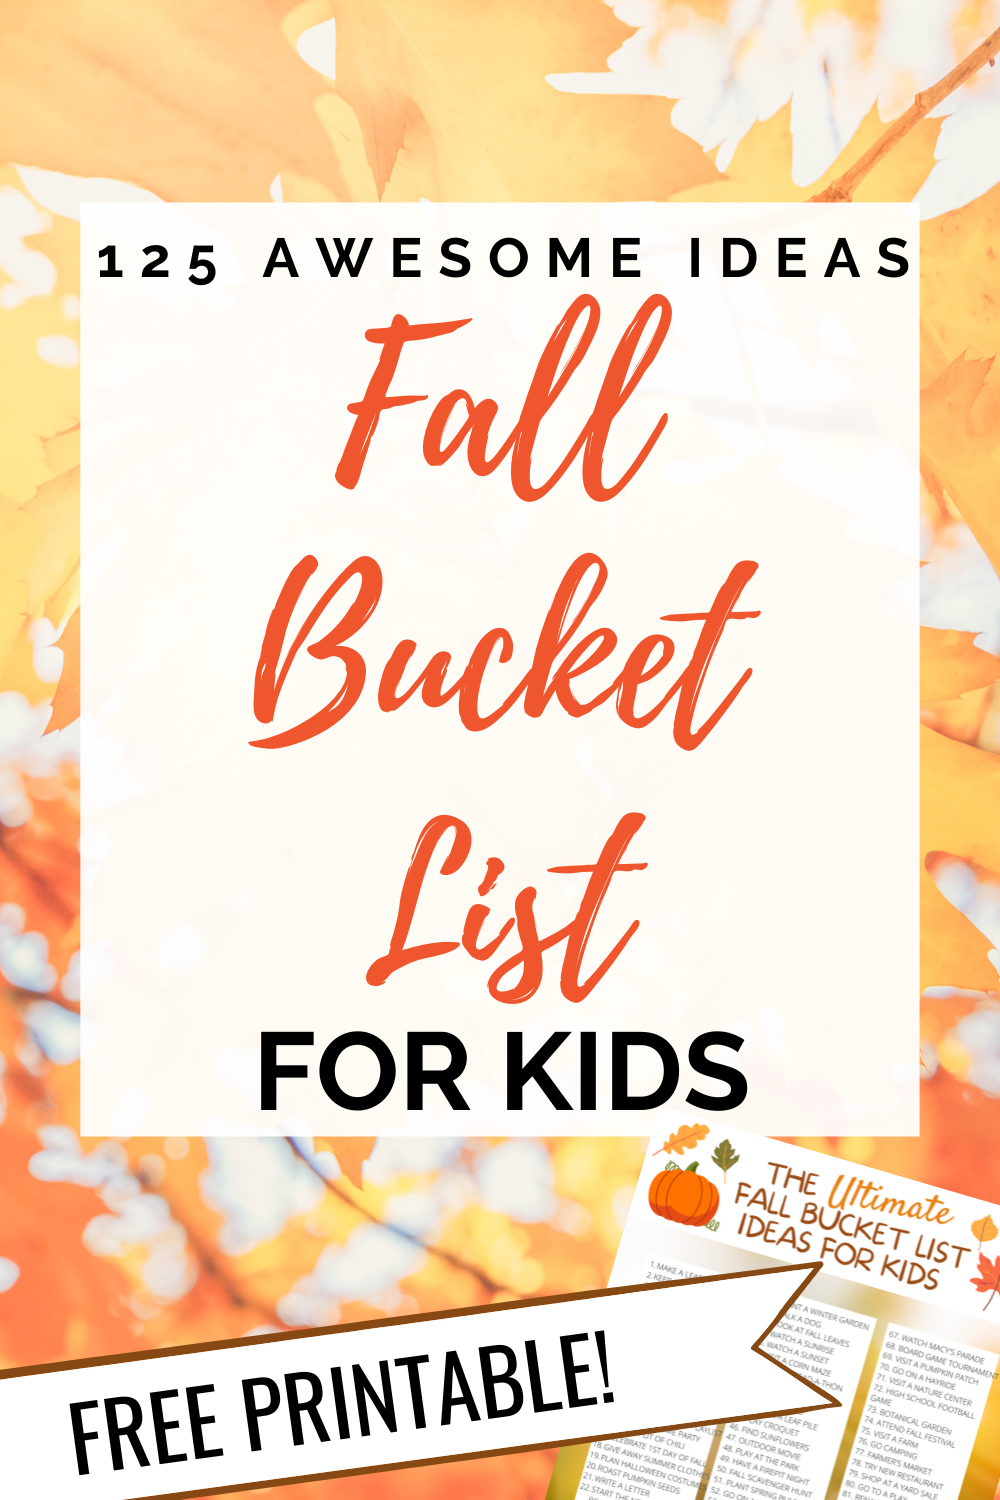 Fall Bucket List 2022 - 125 Awesome Things to Do With Your Kids This Fall